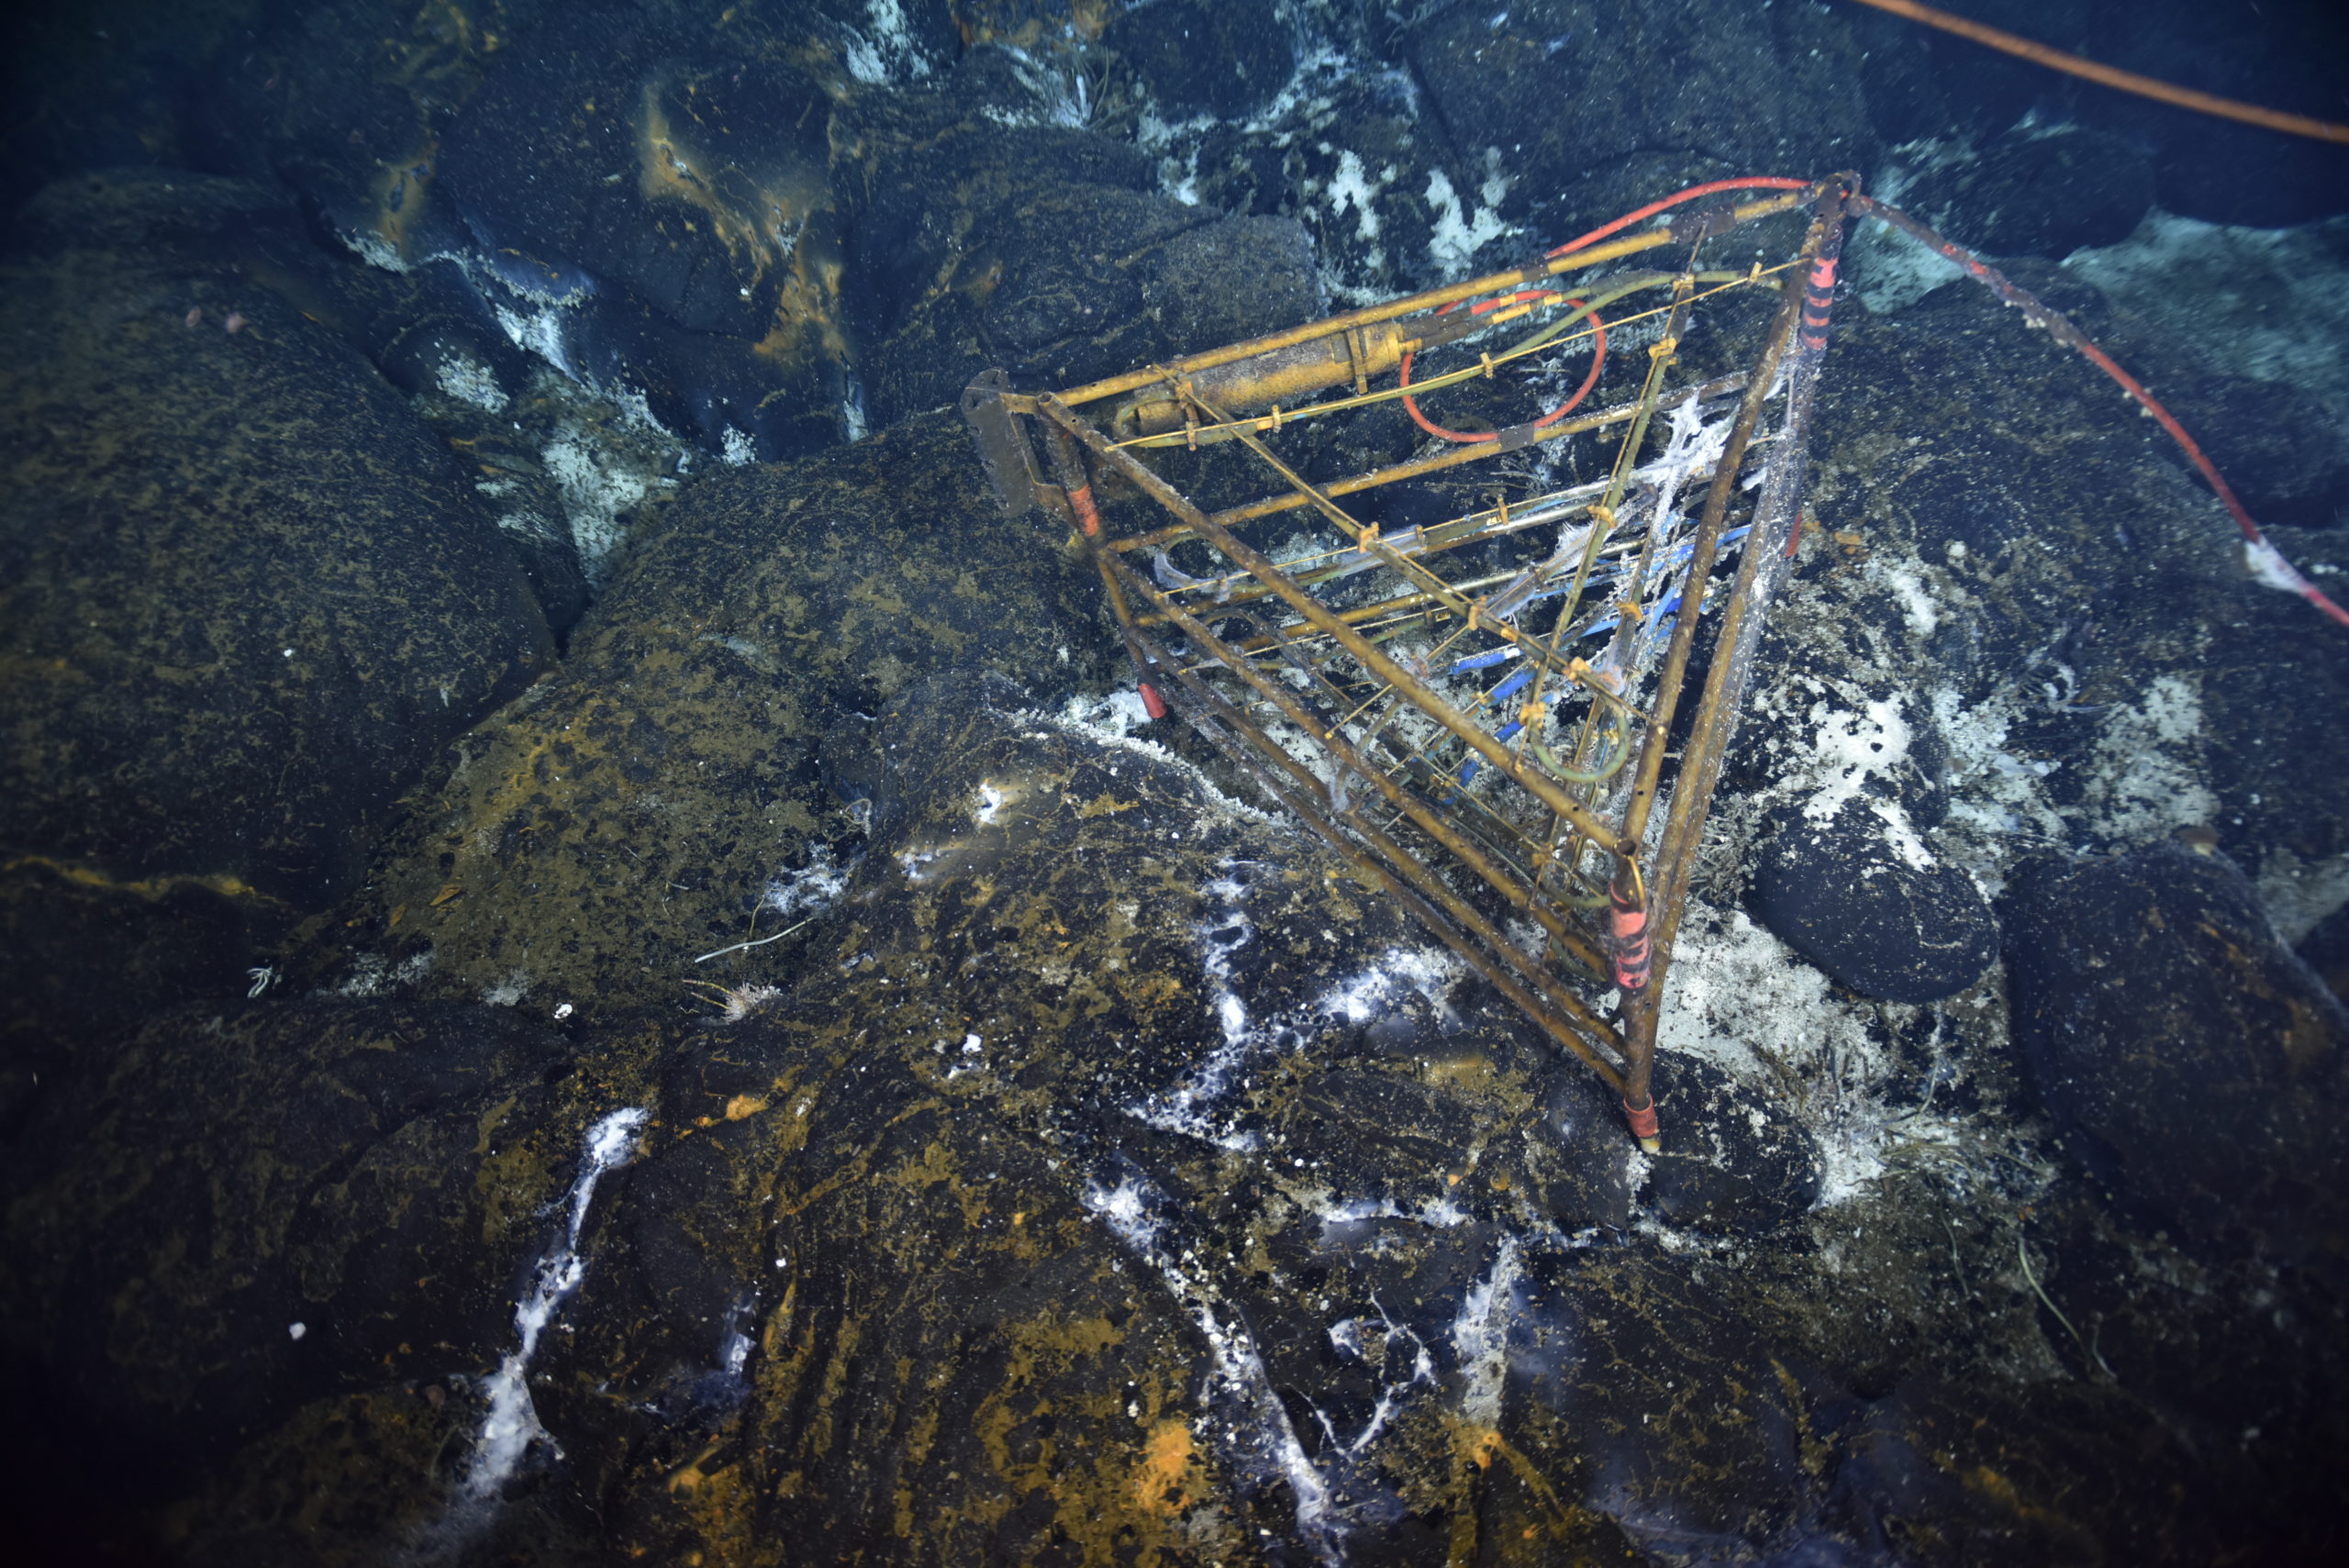 This triangular object is a 3D temperature array: 4 stacked arrays with 24 independent temperature measurement points, providing a three-dimensional distribution of temperature flow across the seafloor at ASHES vent field on Axial Seamount. Credit: NSF-OOI/UW/CSSF, Dive R2249, V22